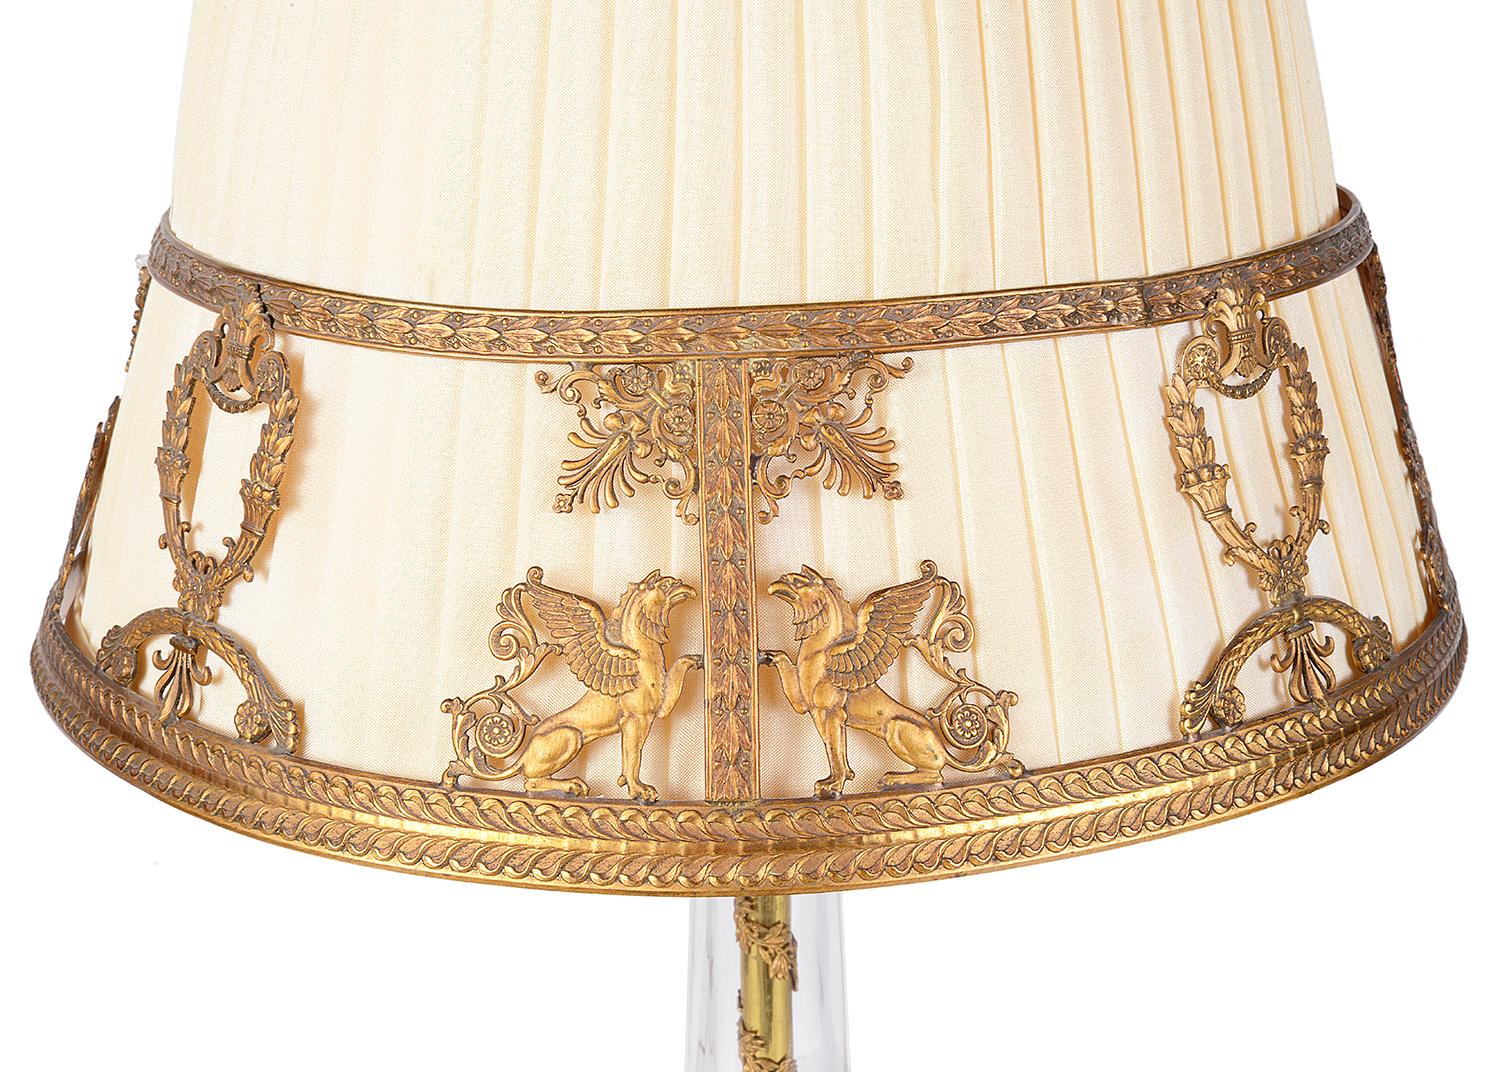 A very good quality late 19th century French gilded ormolu table lamp, having a pleated shade, Empire influenced griffins, motifs and foliate decoration. The glass stem with pieced ormolu, classical maidens with children playing and mounted on a